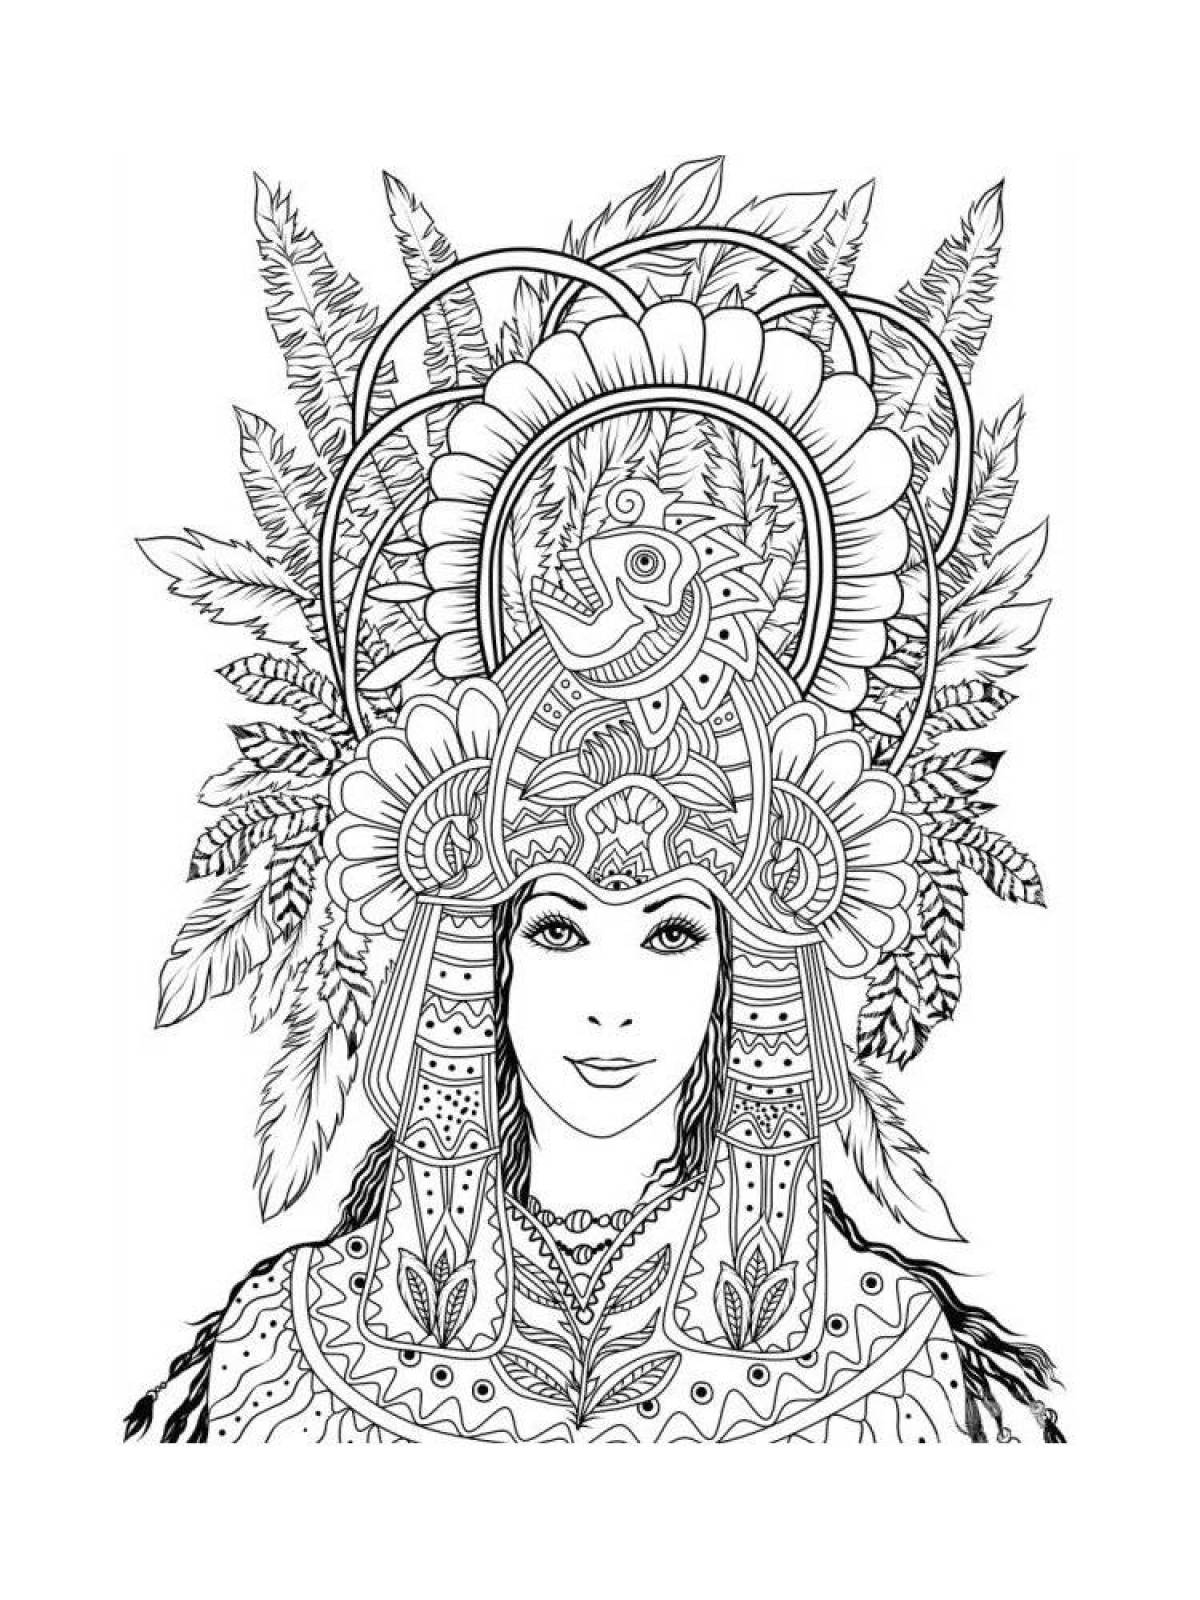 Gorgeous valya carnival coloring book